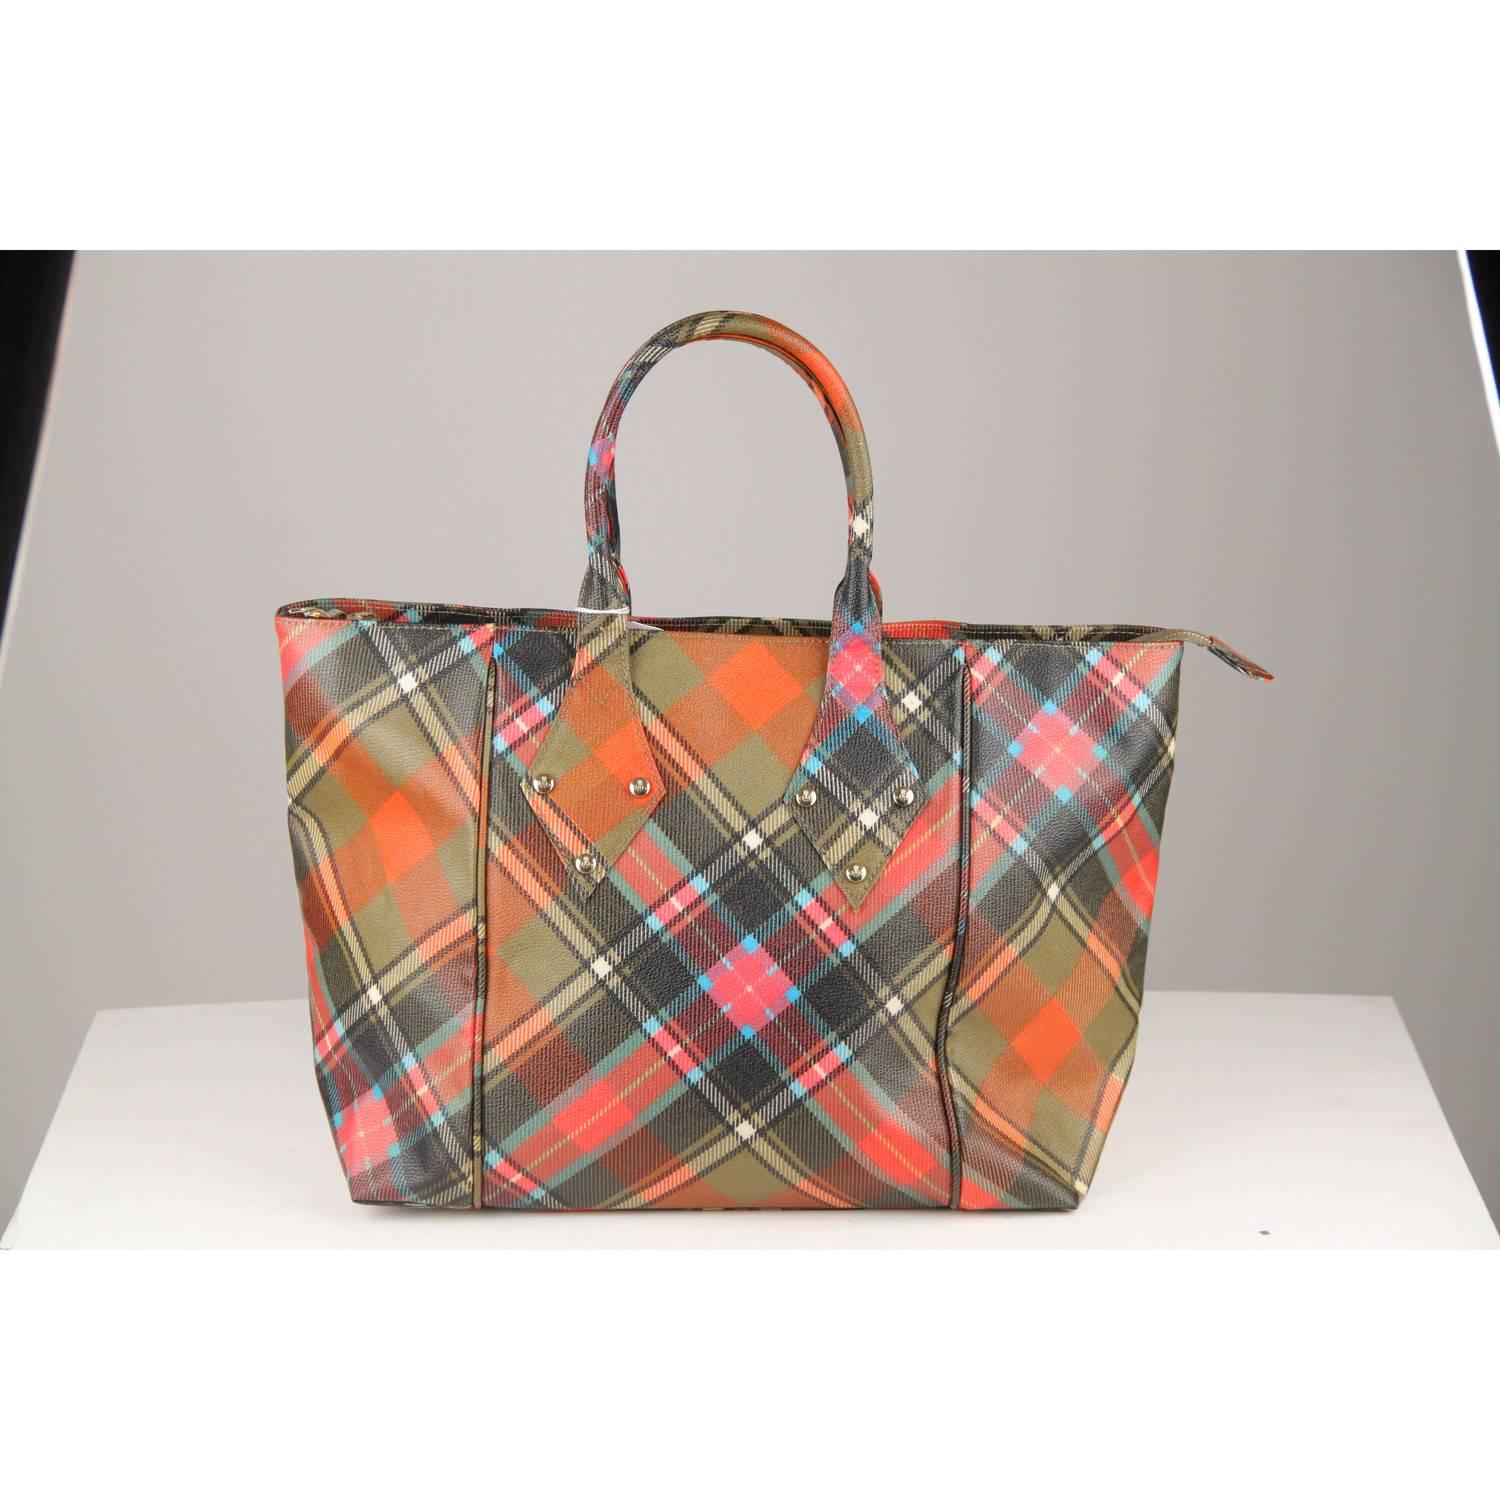 - Multicolored tartan canvas
- Signed gold metal hardware
- Upper zipper closure
- Protective bottom feet
- Fabric lining 
- 1 side zip pocket and 2 open pocket inside 
- 'VIVIENNE WESTWOOD London - made in Italy' tag inside